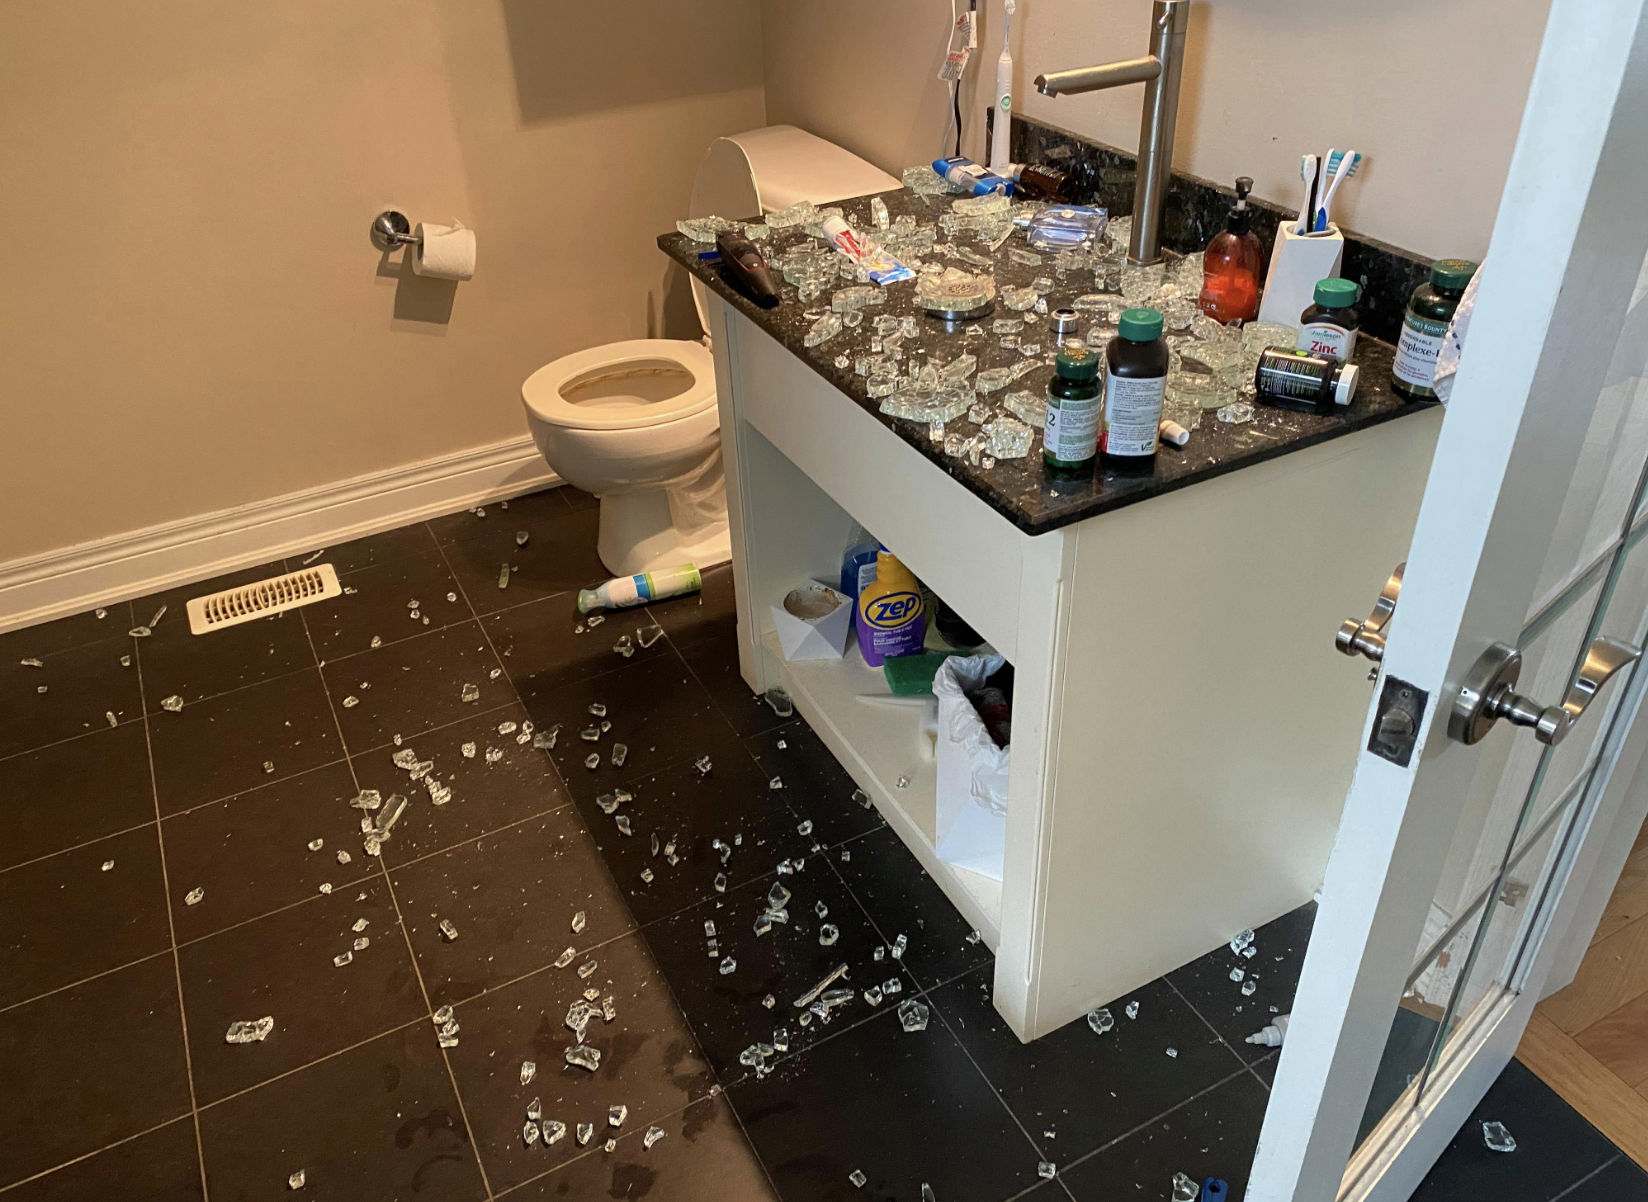 Someone dropped their cologne onto a glass sink, shattering both and covering the bathroom in shards of glass